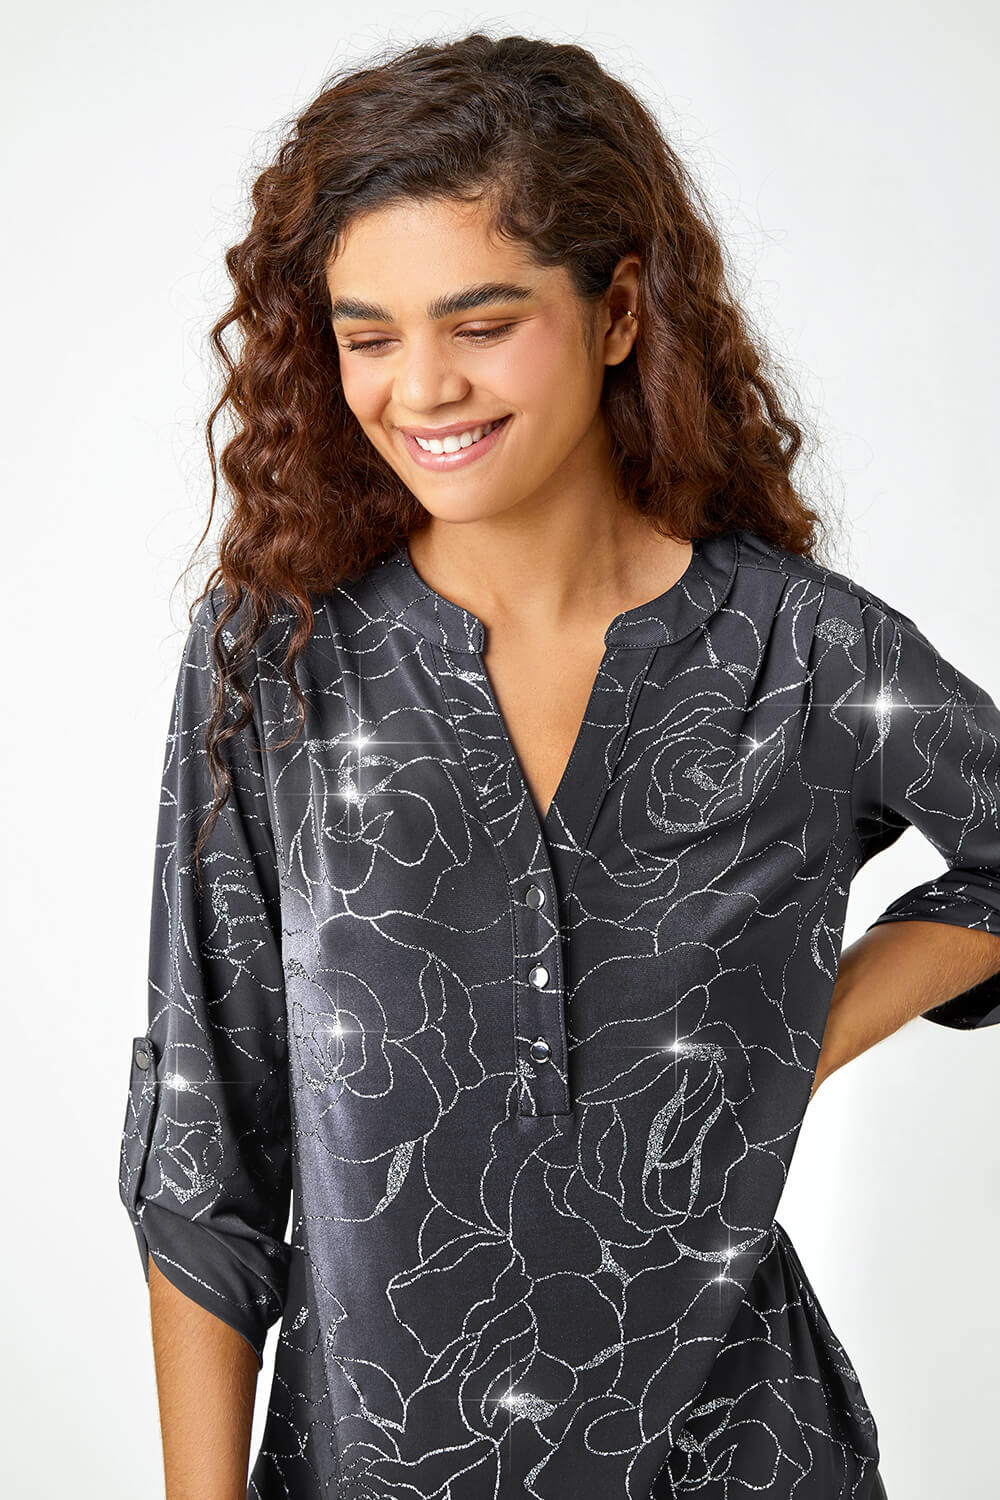 Grey Metallic Linear Floral Stretch Shirt, Image 4 of 5